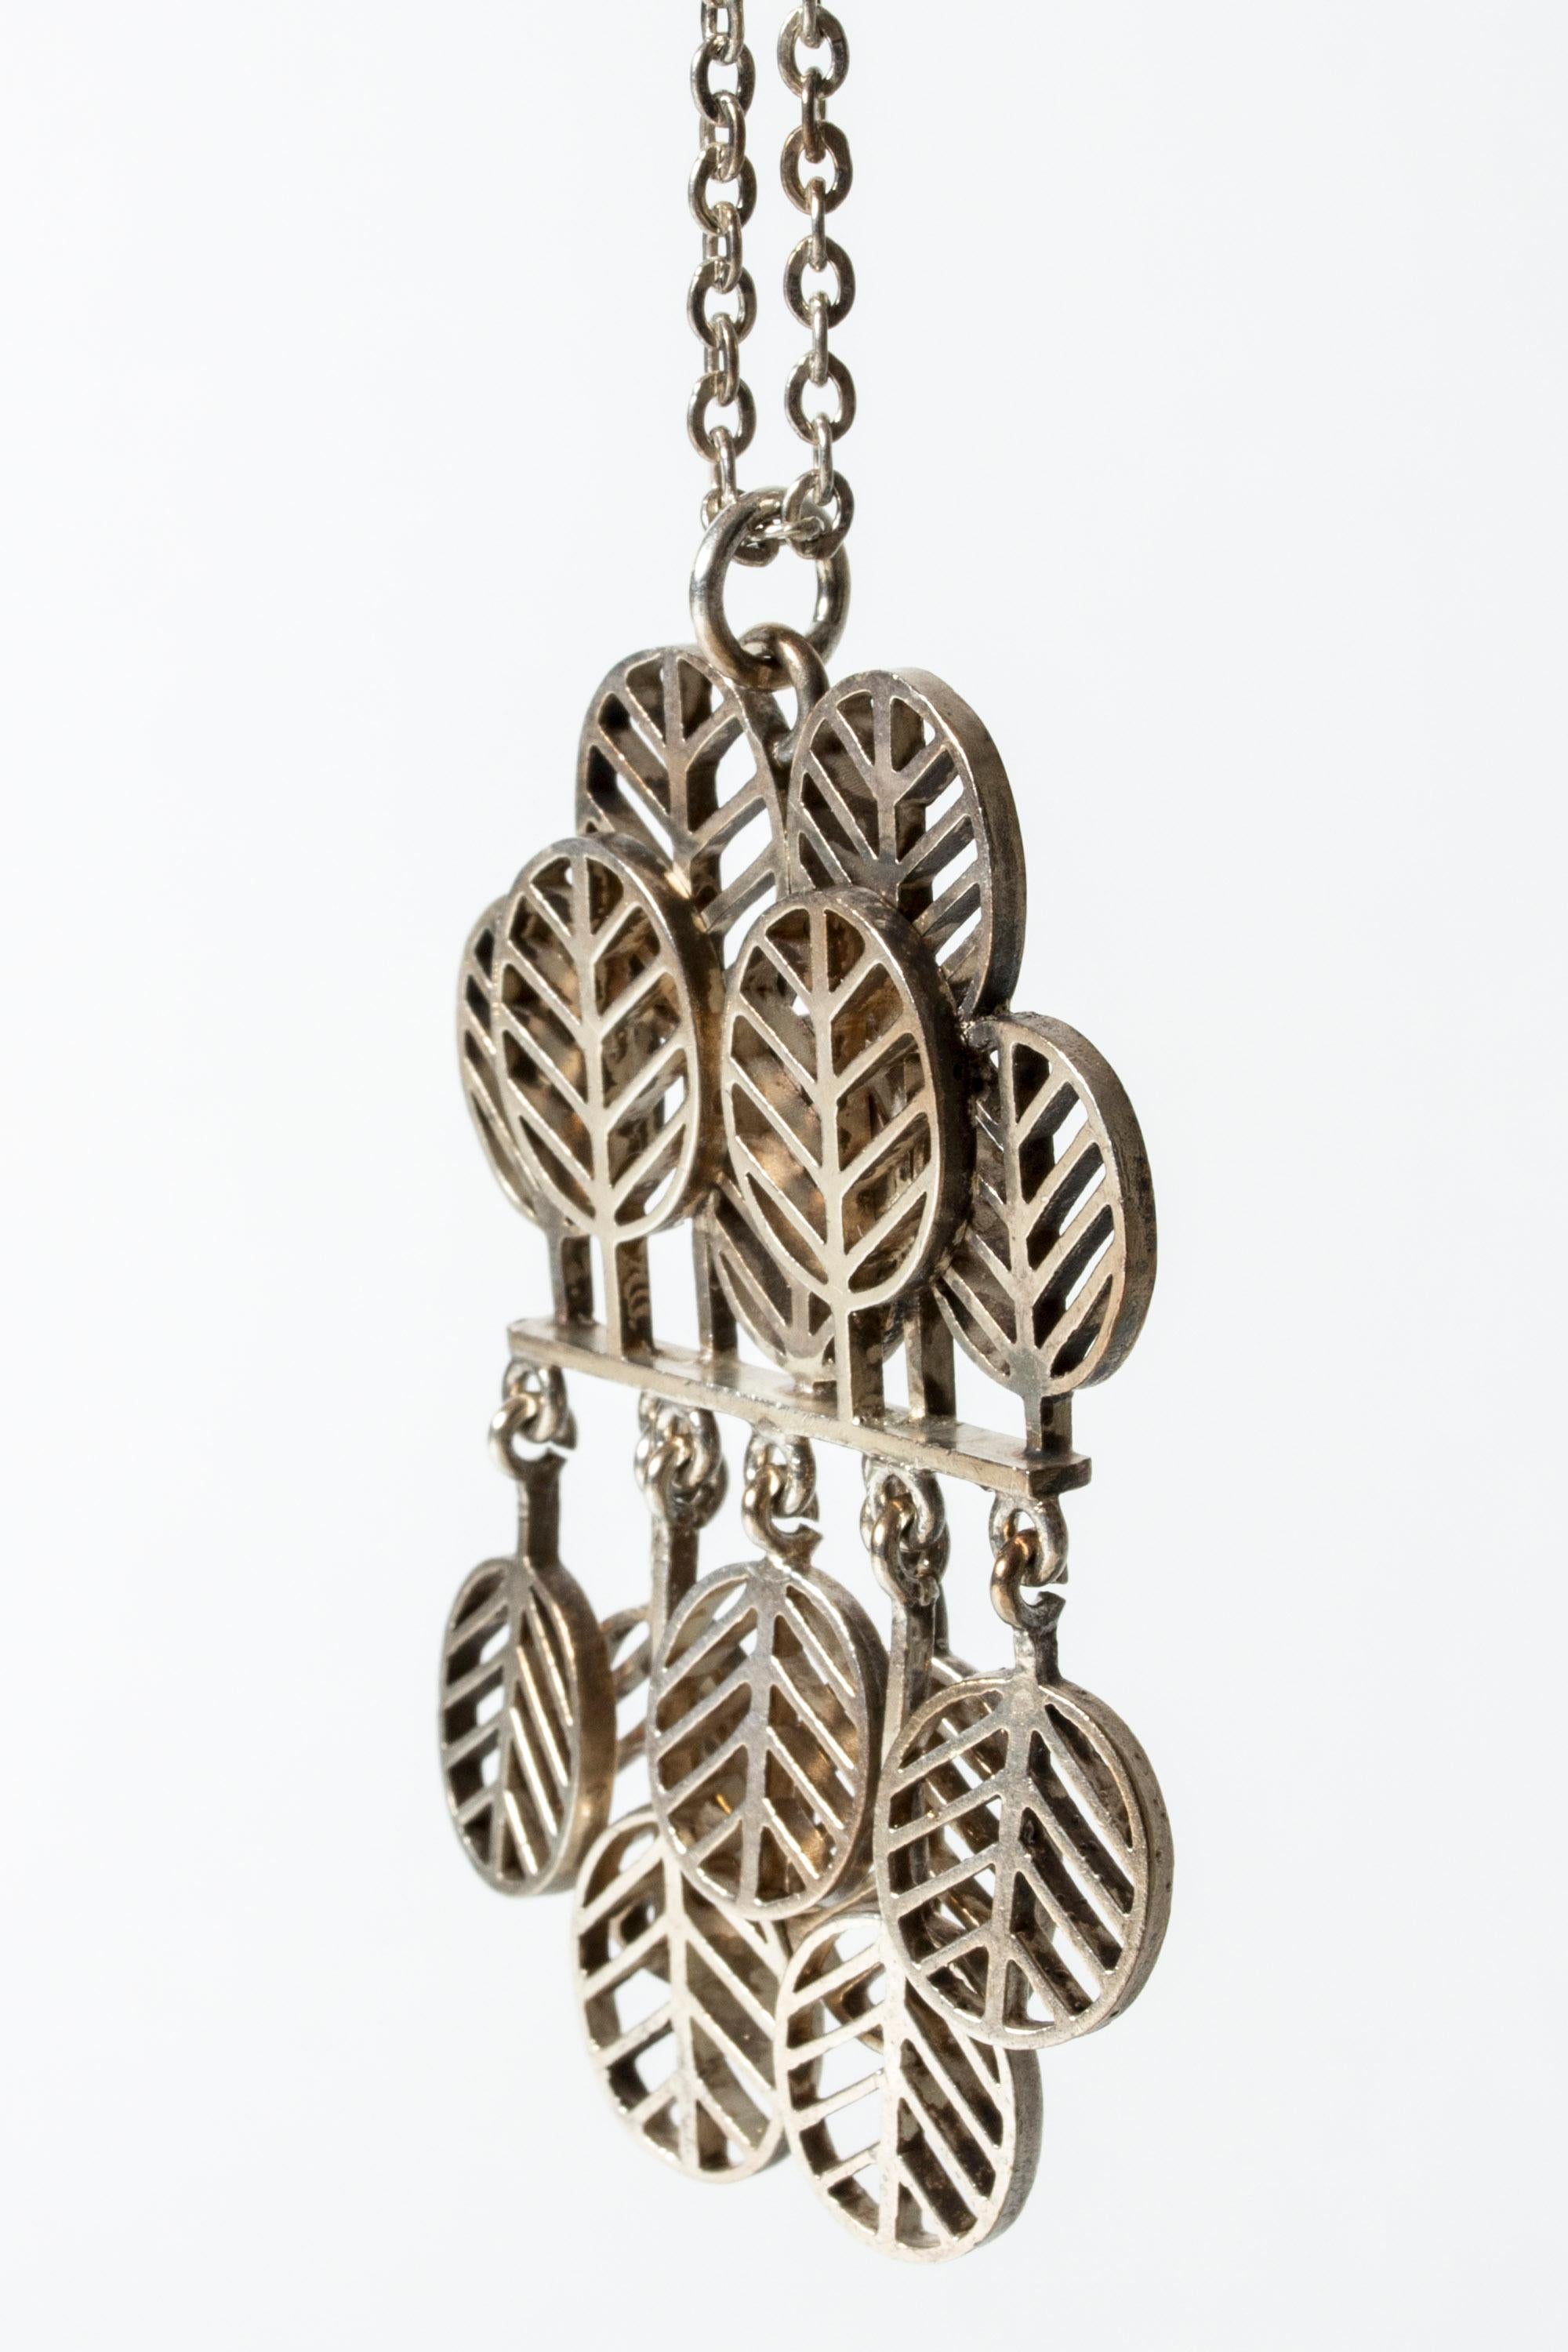 Striking, kinetic silver pendant by Jorma Laine, in a design of stylized leaves. Nice movement in the loosely hanging, downward turned leaves.